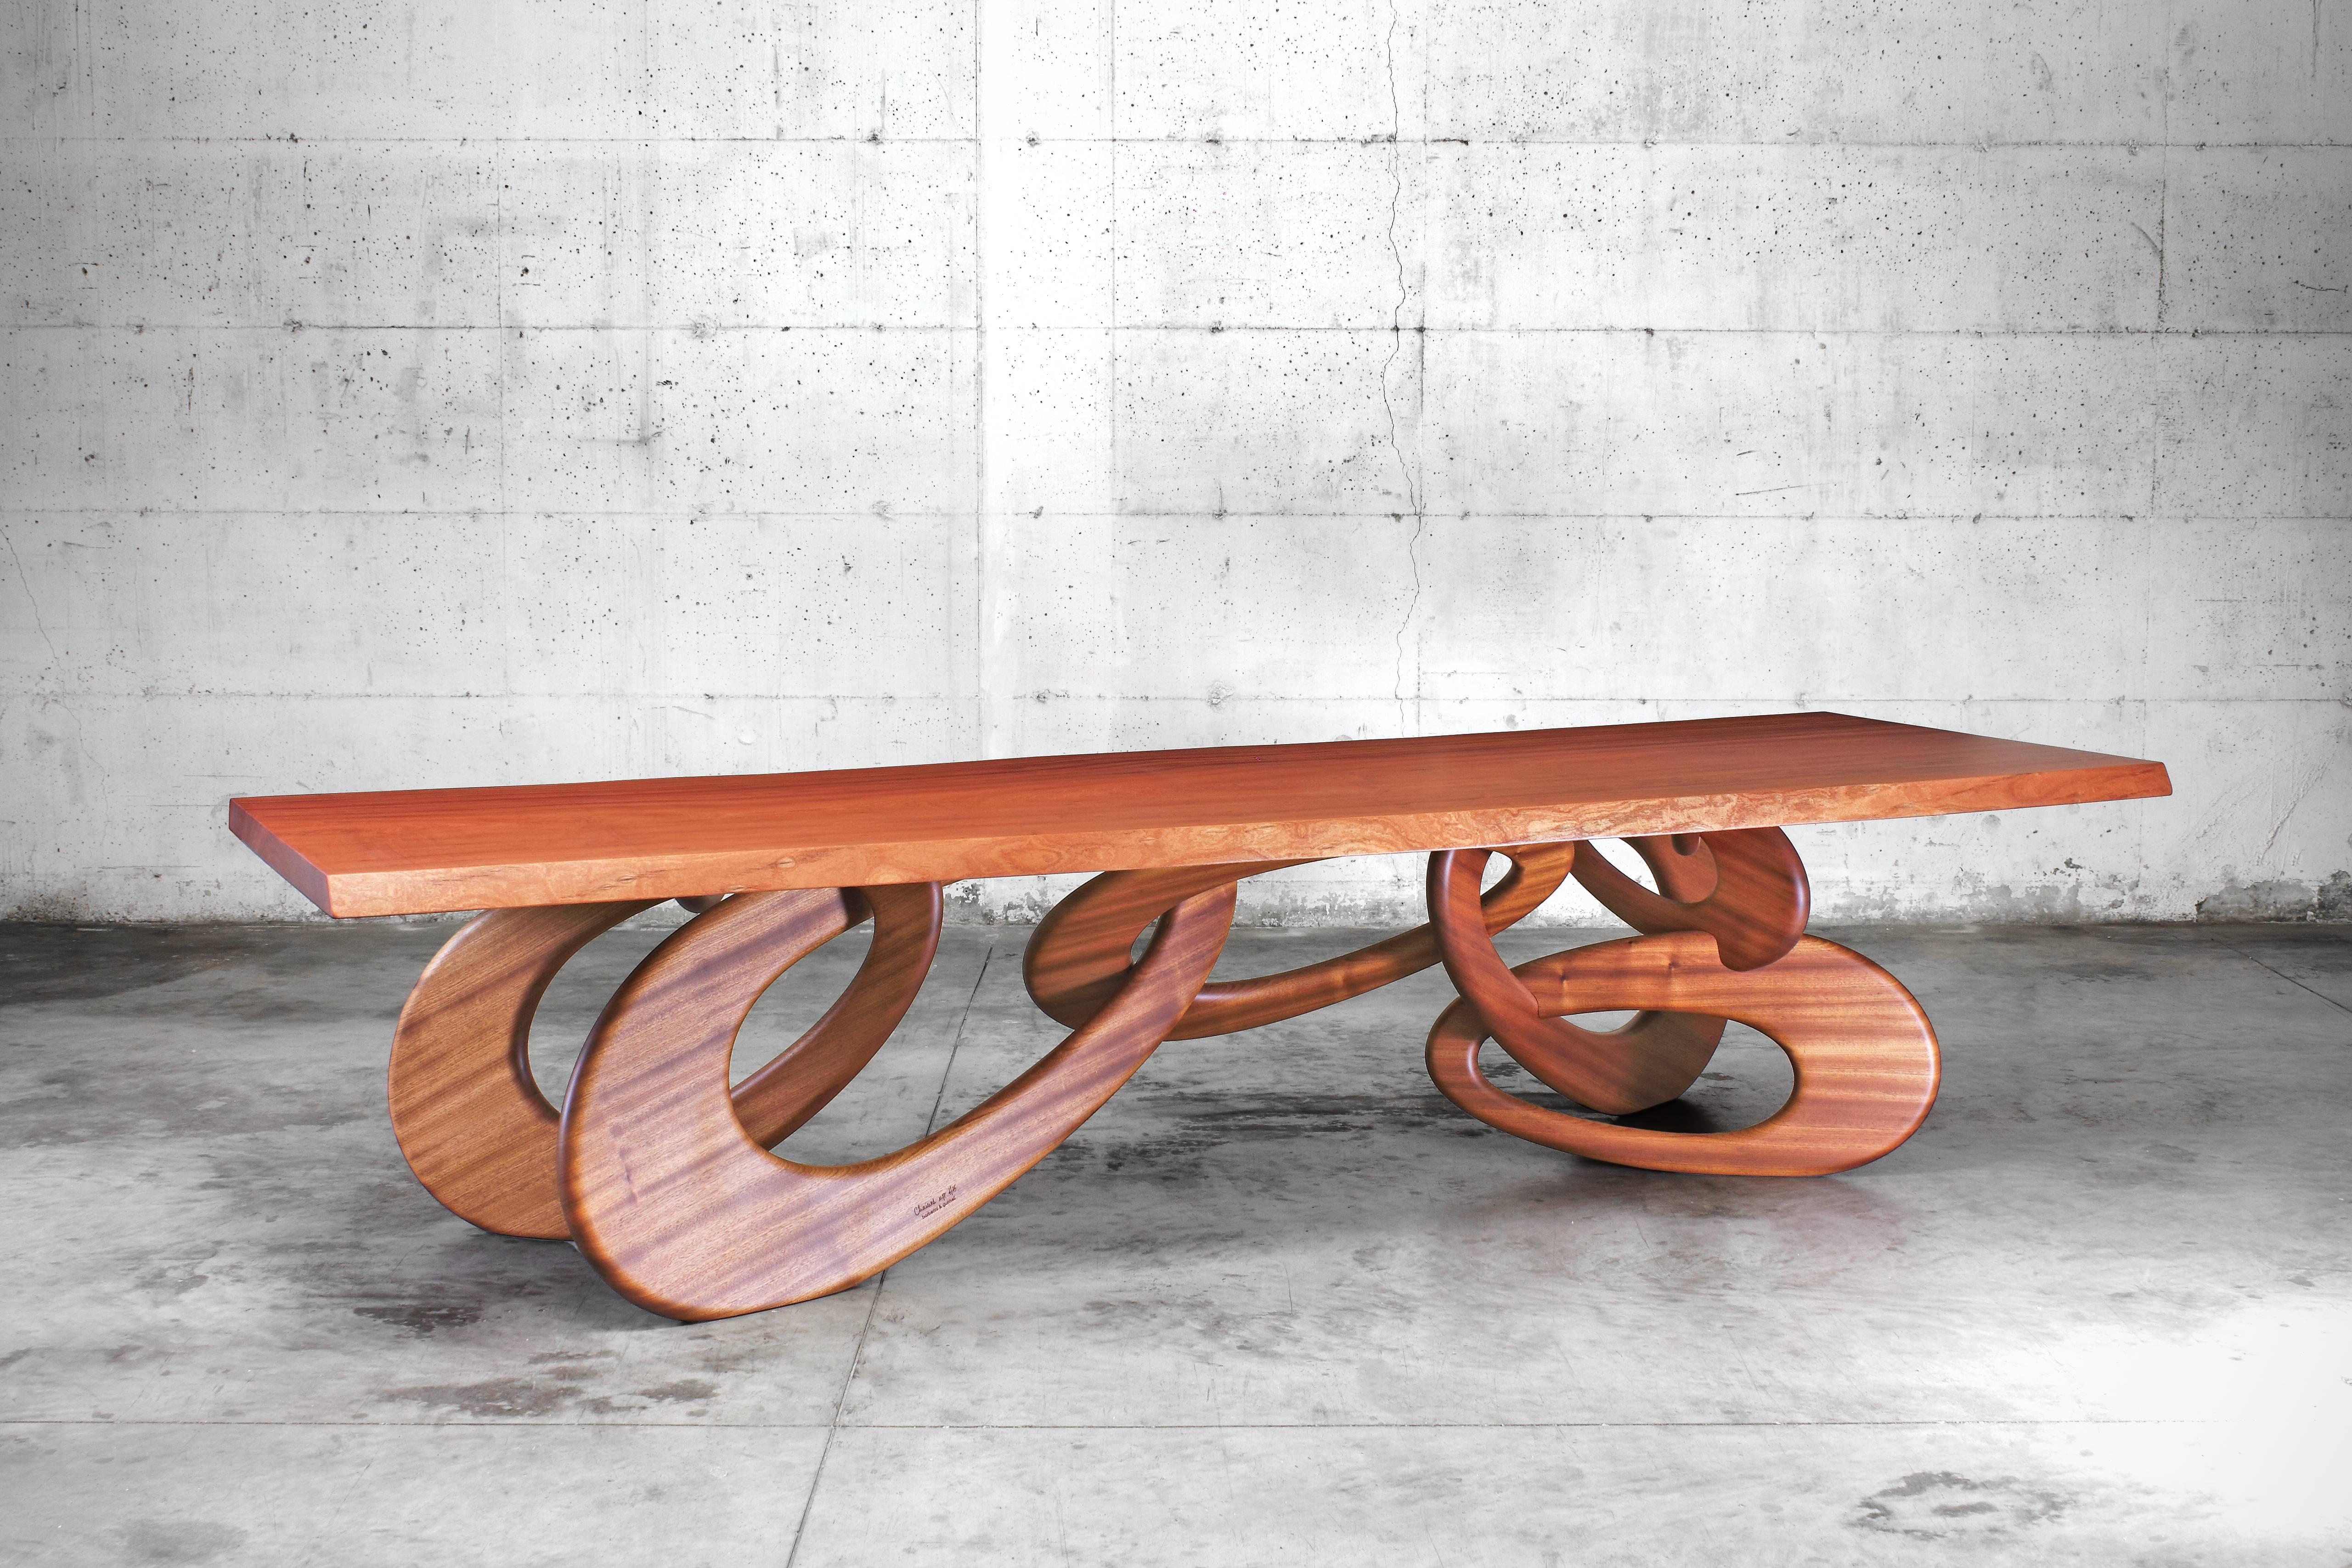 The 'Chained Up' dining table is an important dining table with structure and top in rare one-piece slab mahogany wood (origin: Africa). 

Dining table dimension: L 320 x W 120 x H 76 cm. Dimensions are customizable. 

Limited Edition of 15.

Each